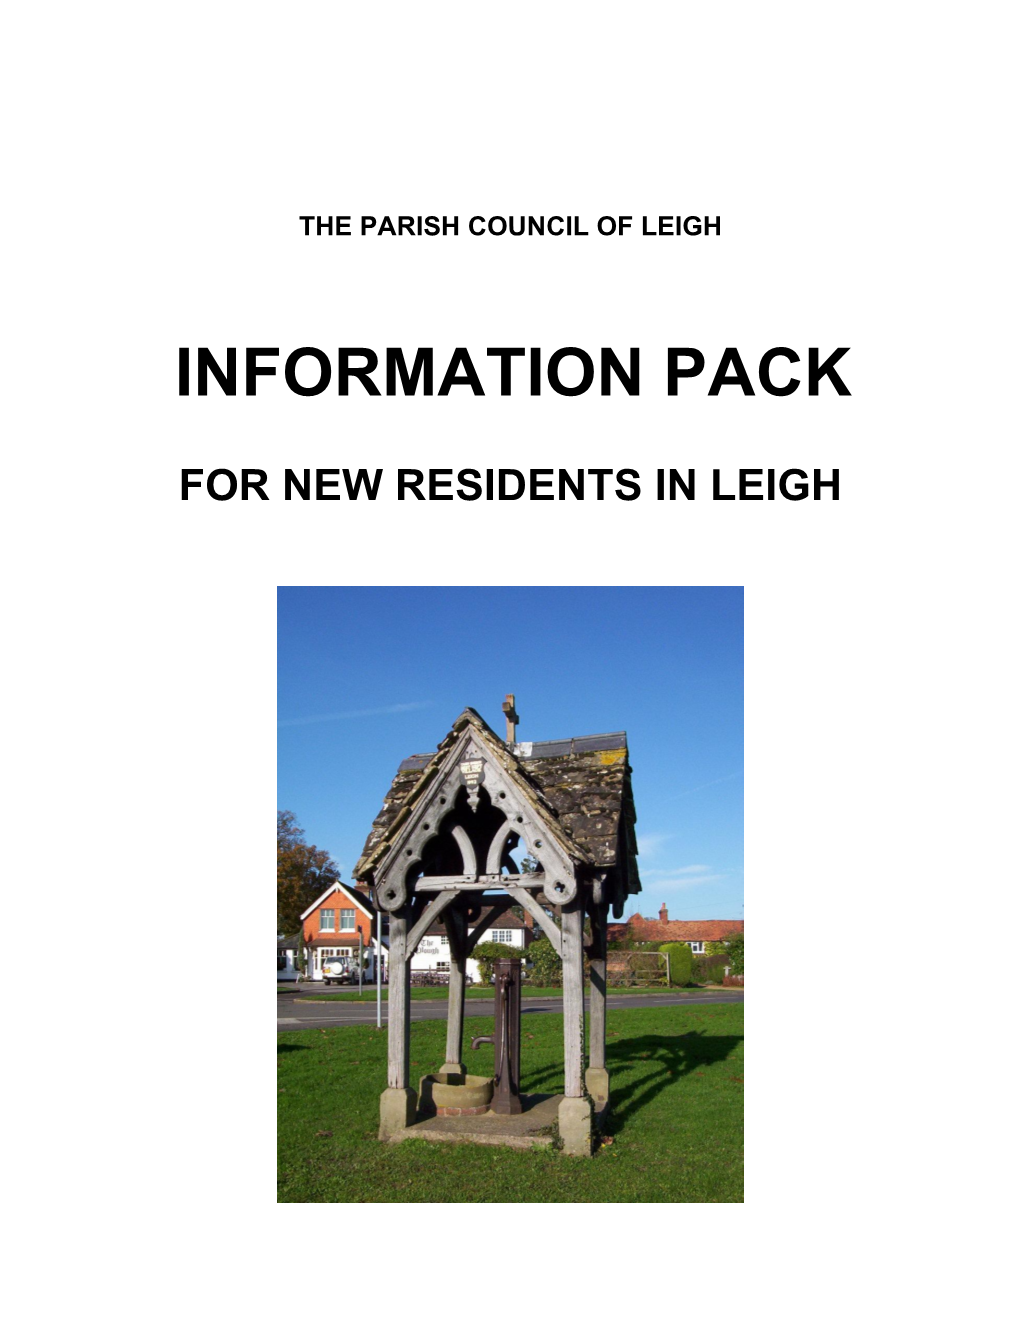 The Parish Council of Leigh